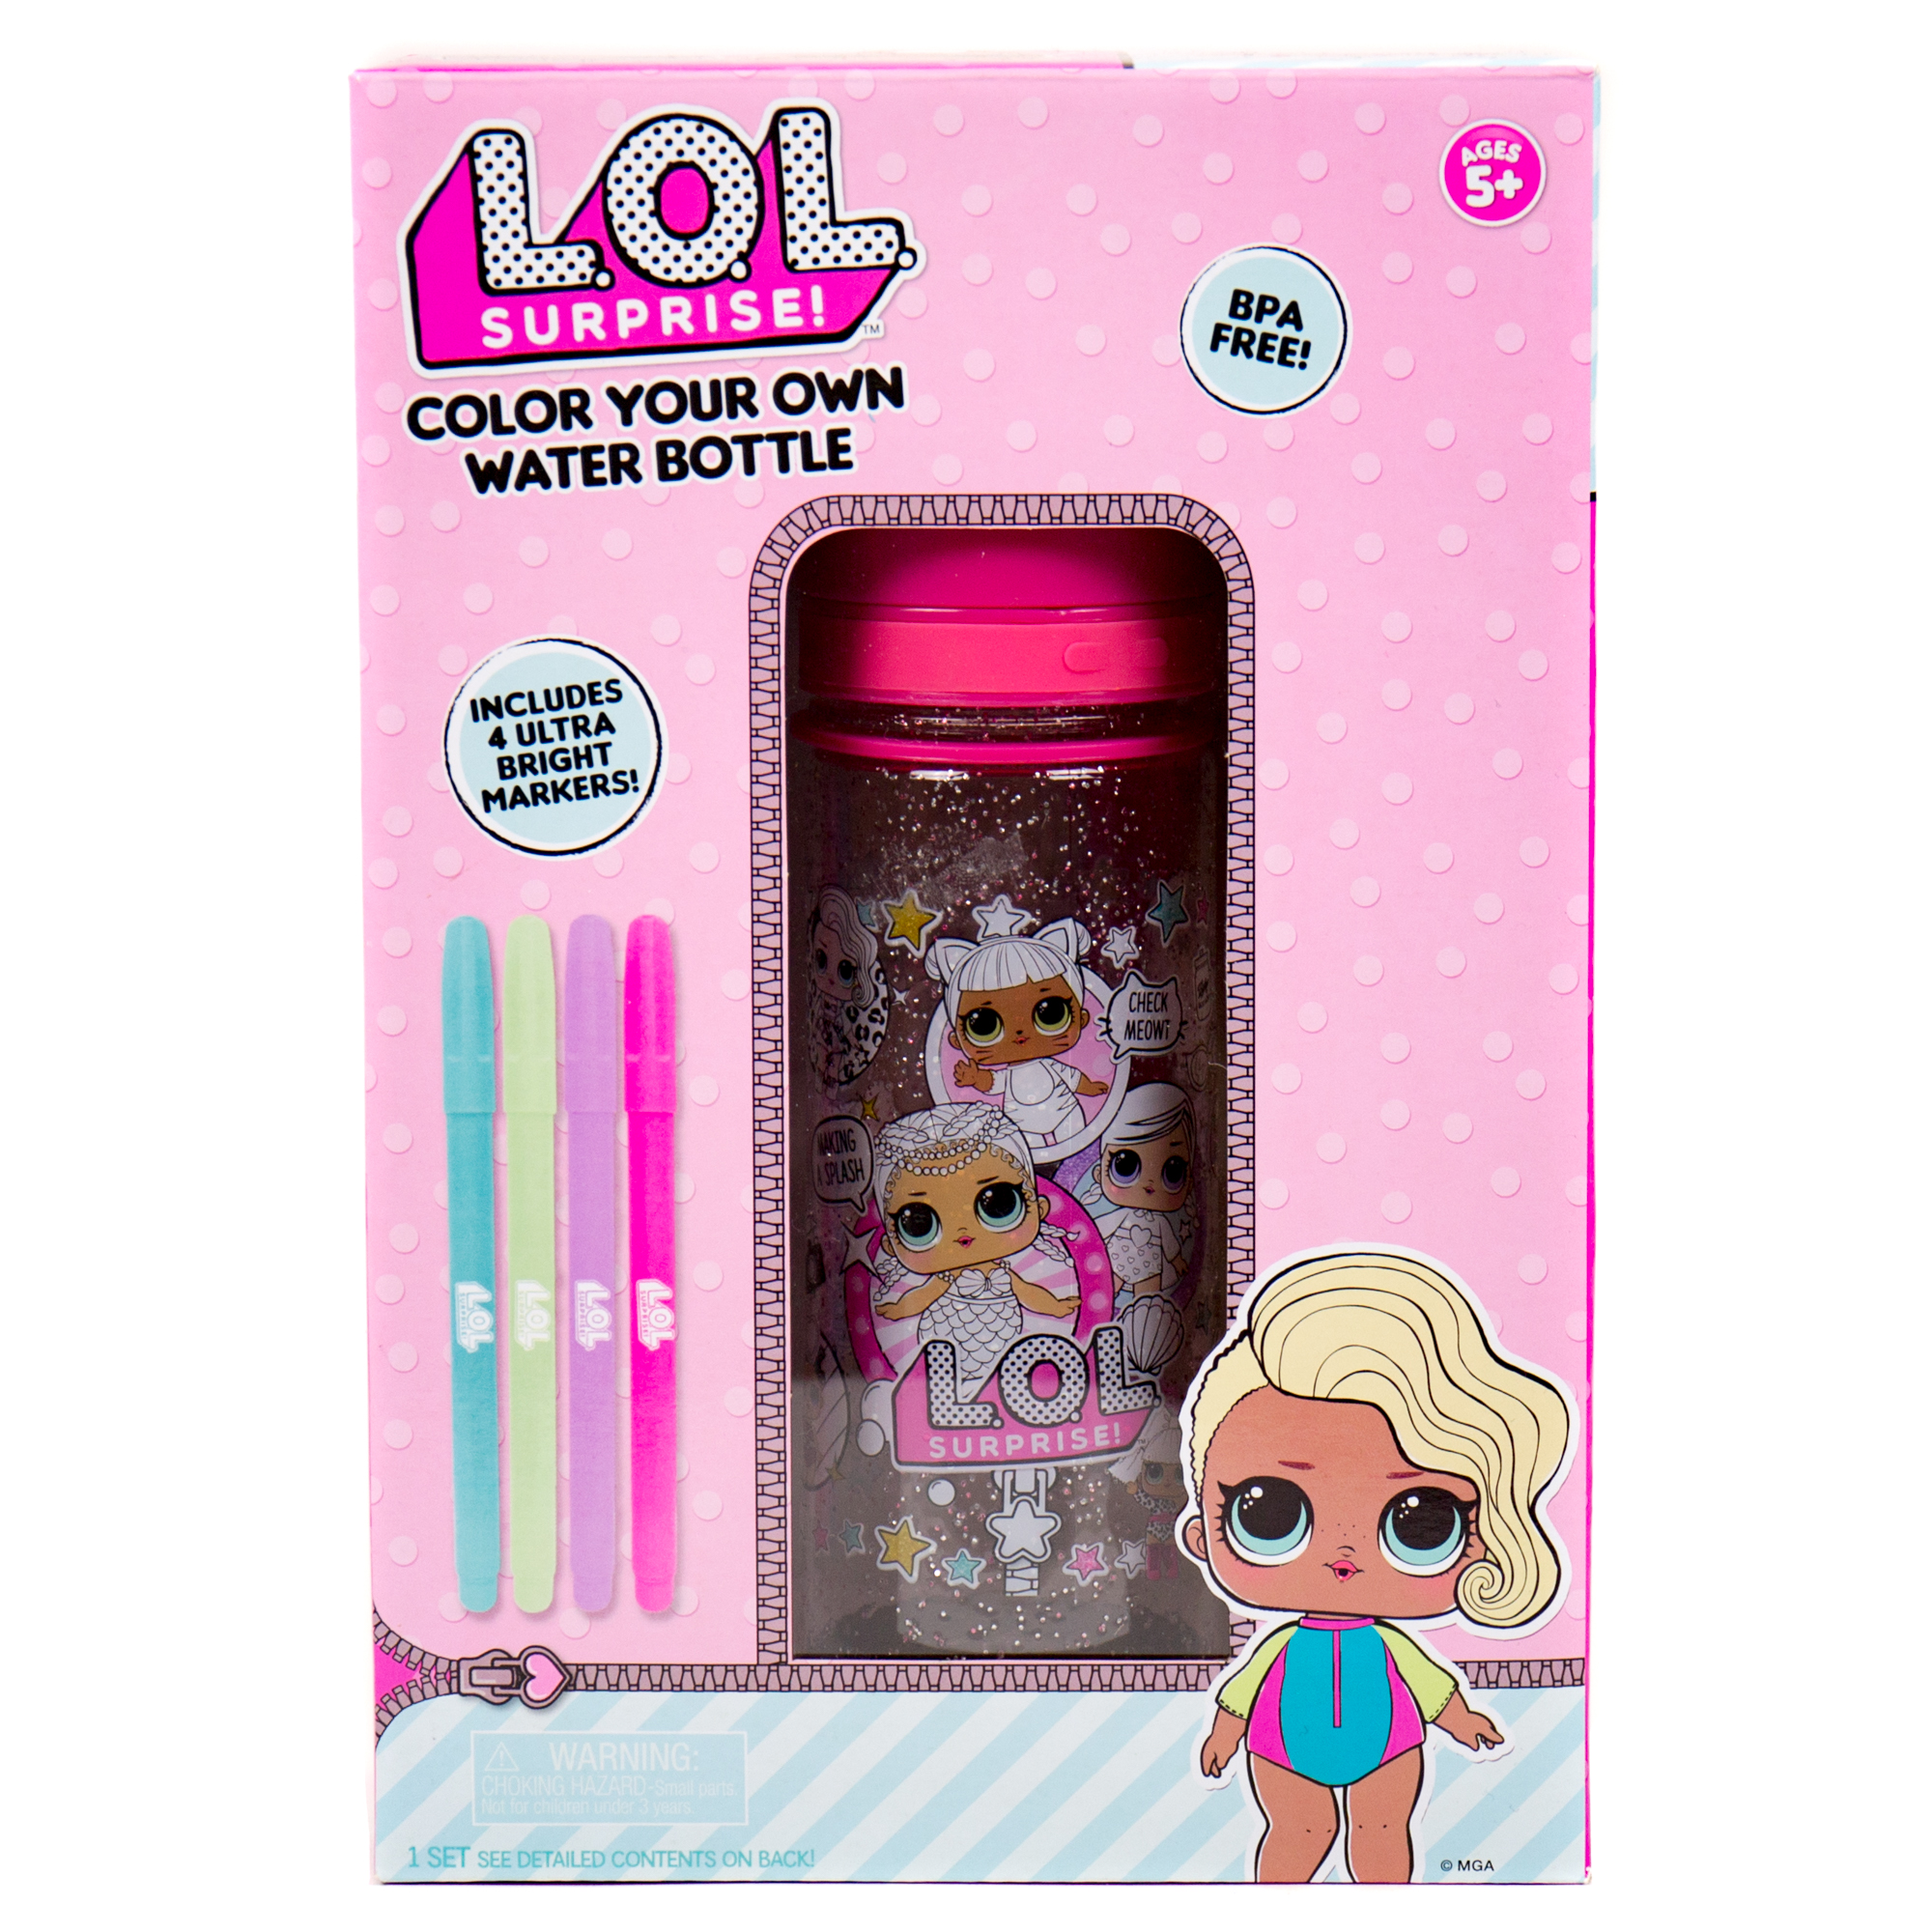 L.O.L. Surprise! Color Your Own Glitter Water Bottle for Kids Ages 5+, BPA-Free - image 1 of 6